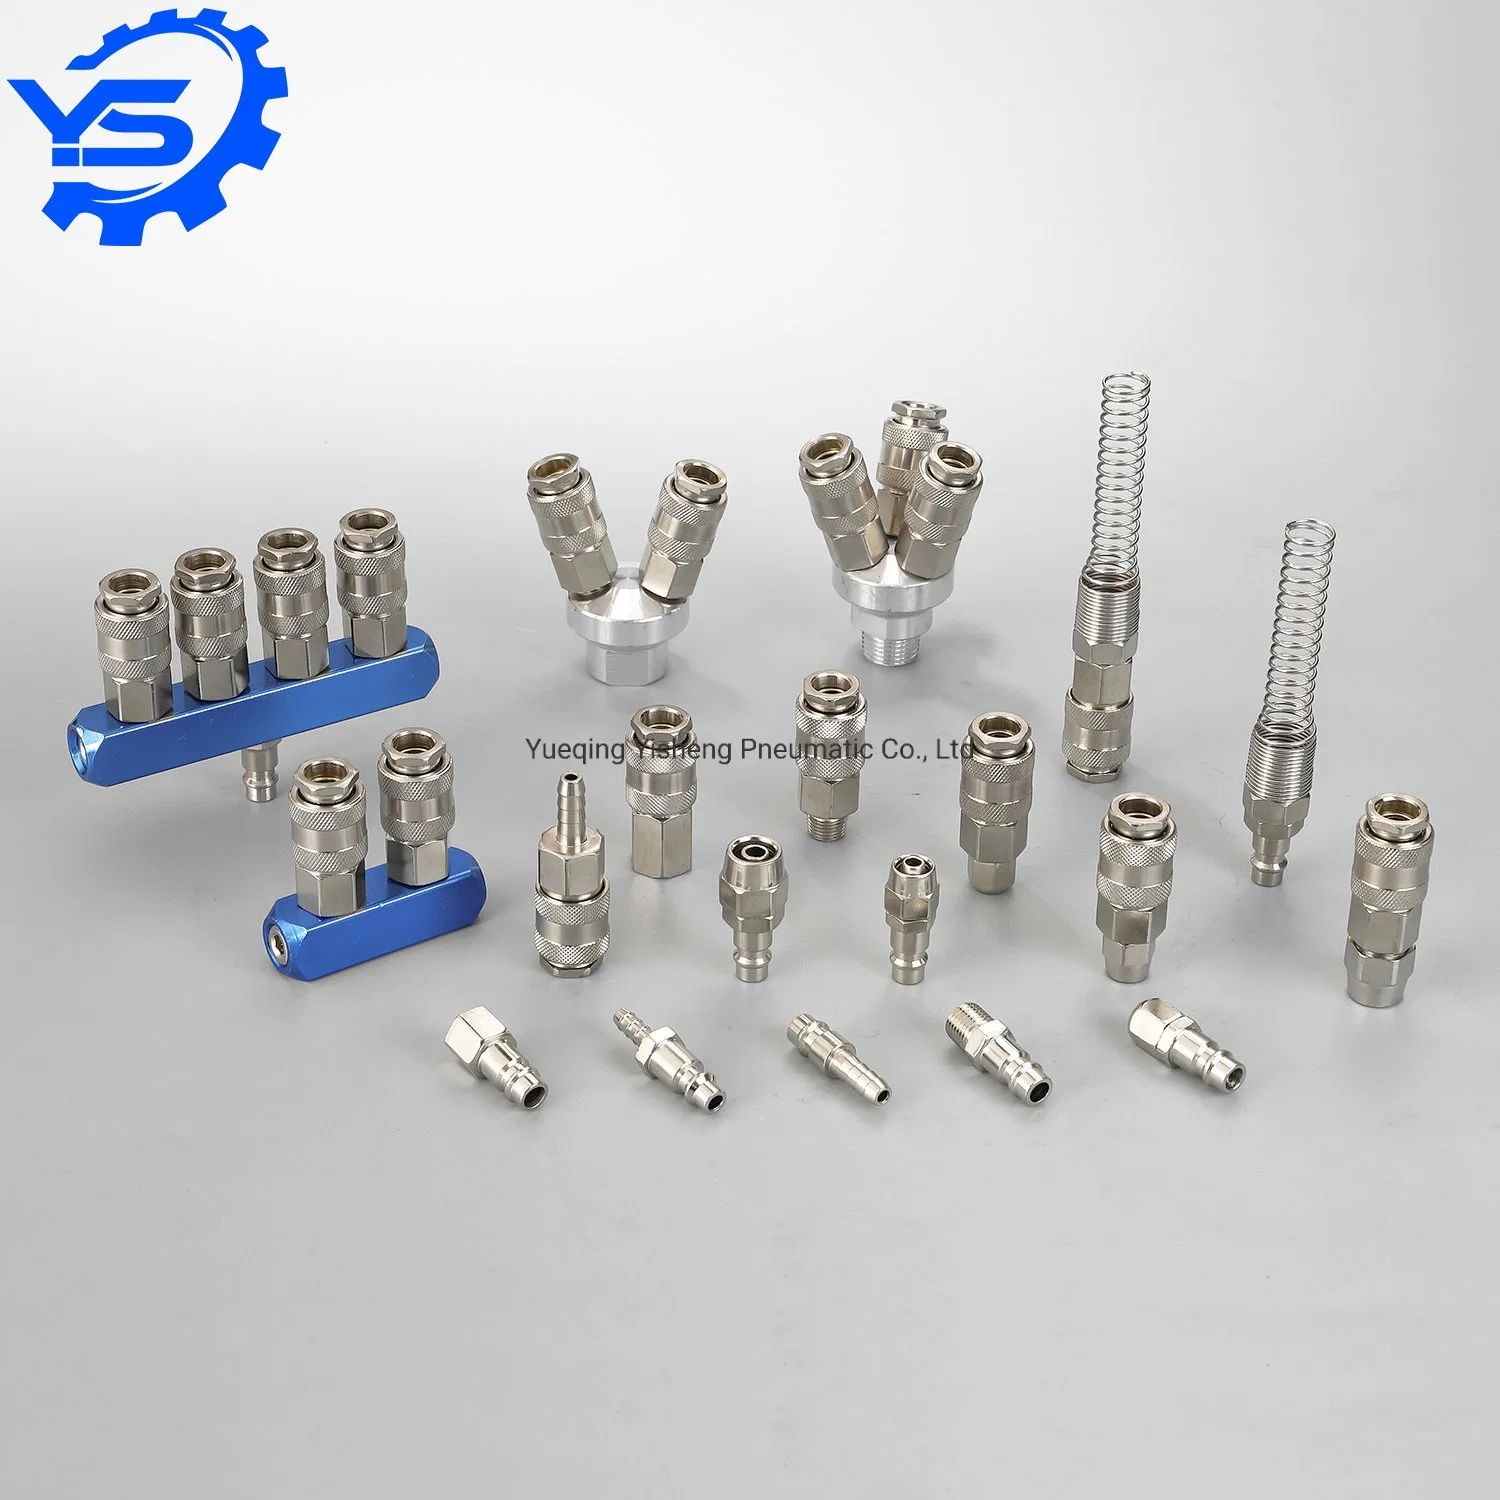 C-Type Iron Brass Pneumatic Couplers Quick Release Coupling Pipe Connect Hydraulic Air Fitting Quick Connect Air Hose Fittings